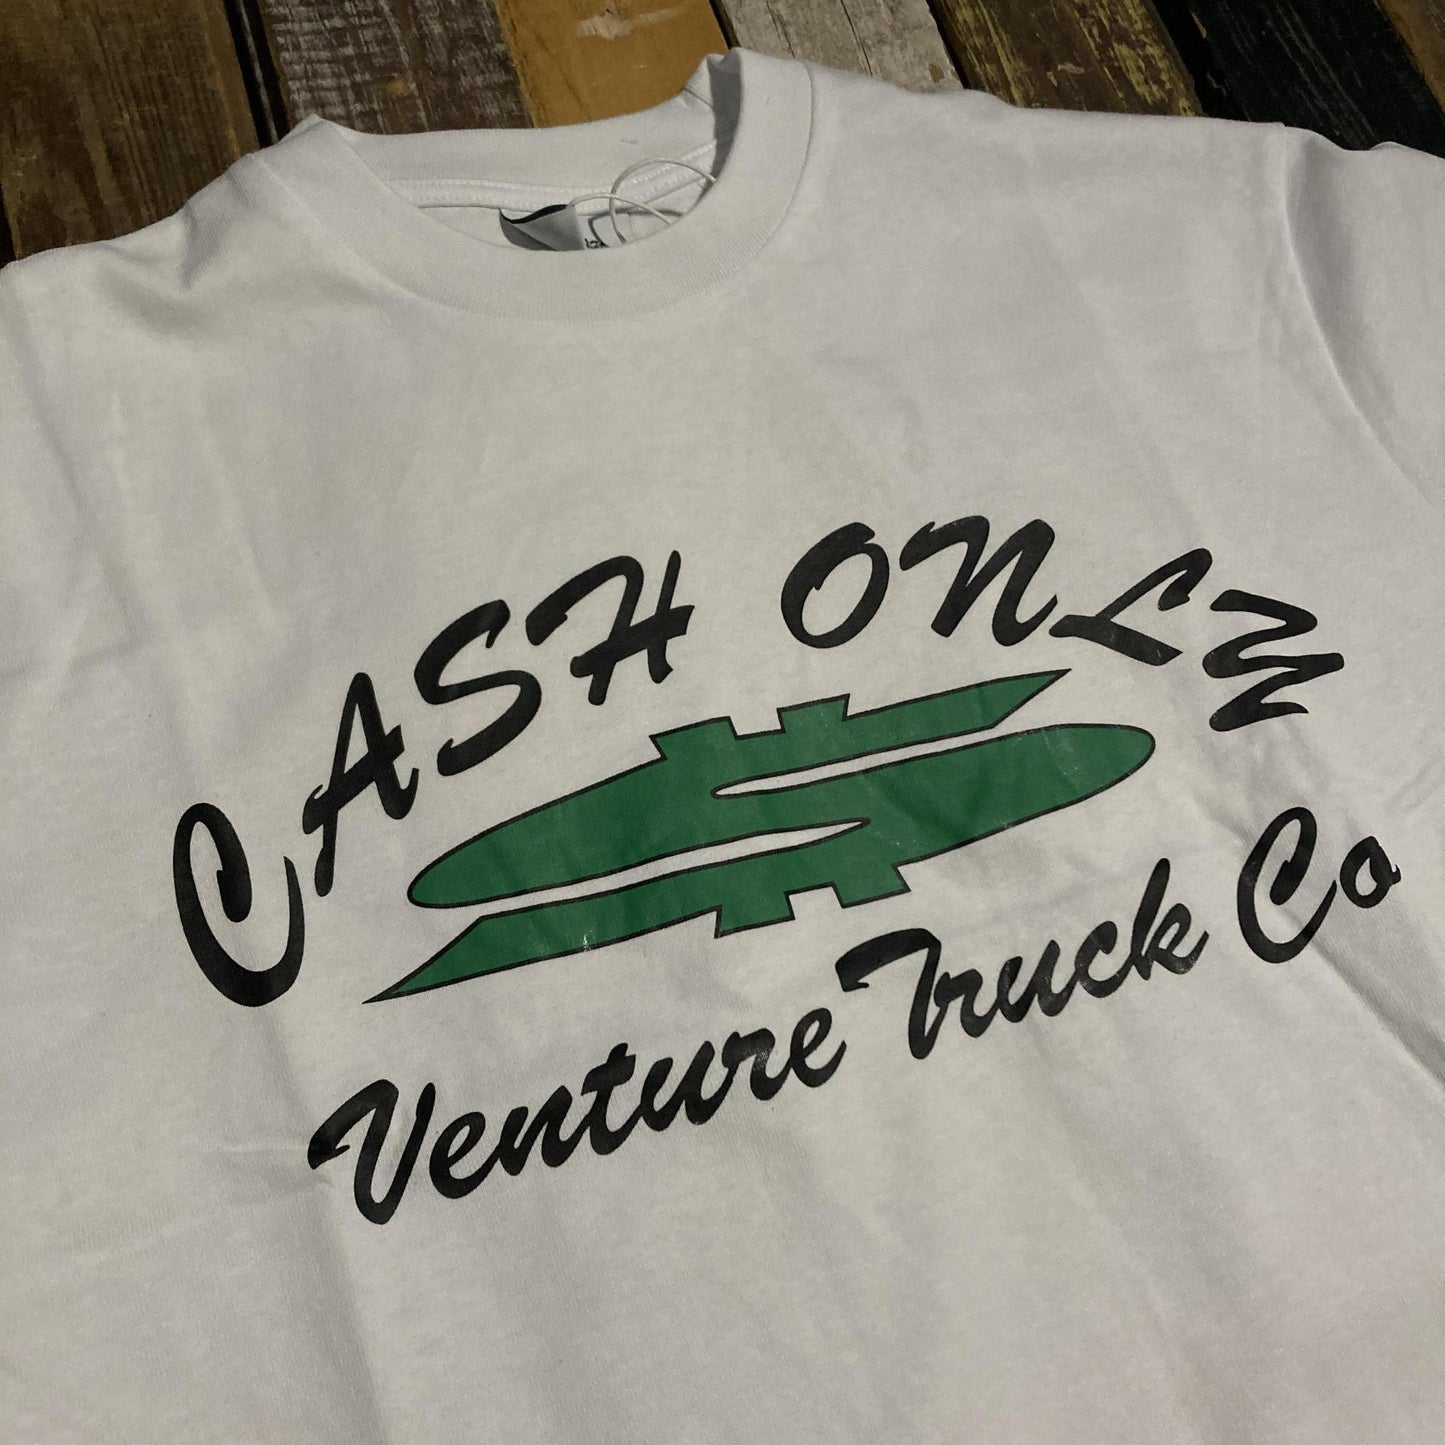 Cash Only X Venture Dollar Sign Tee White